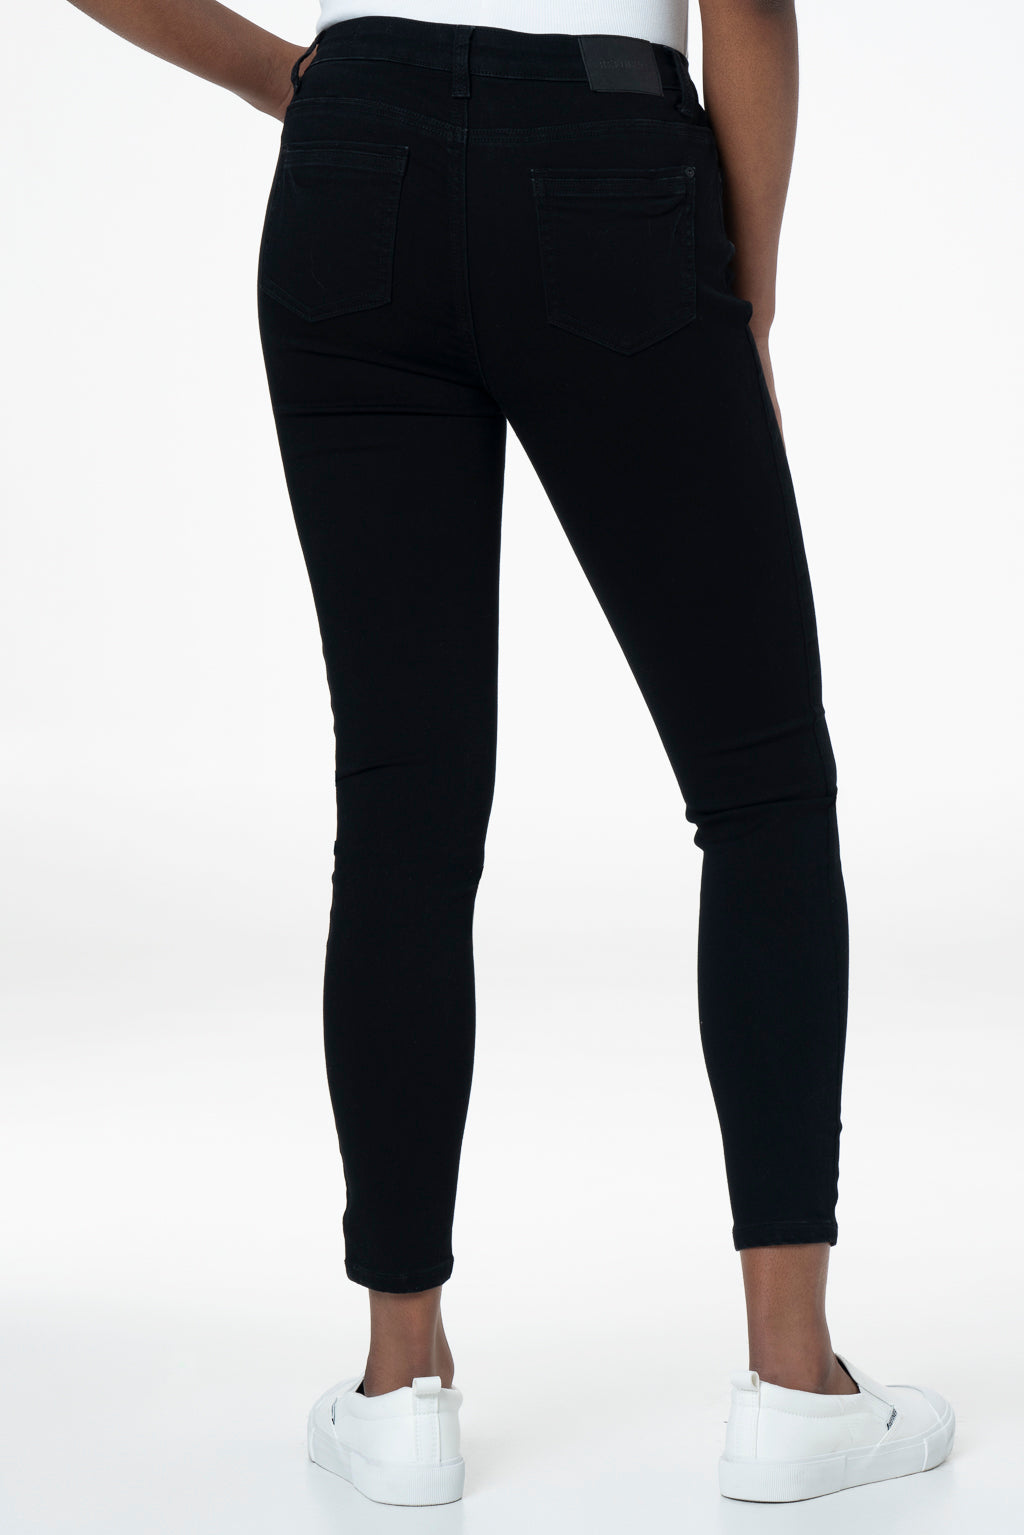 Rf01 Mid-Rise Skinny Jeans _ 140837 _ Black from REFINERY – Refinery